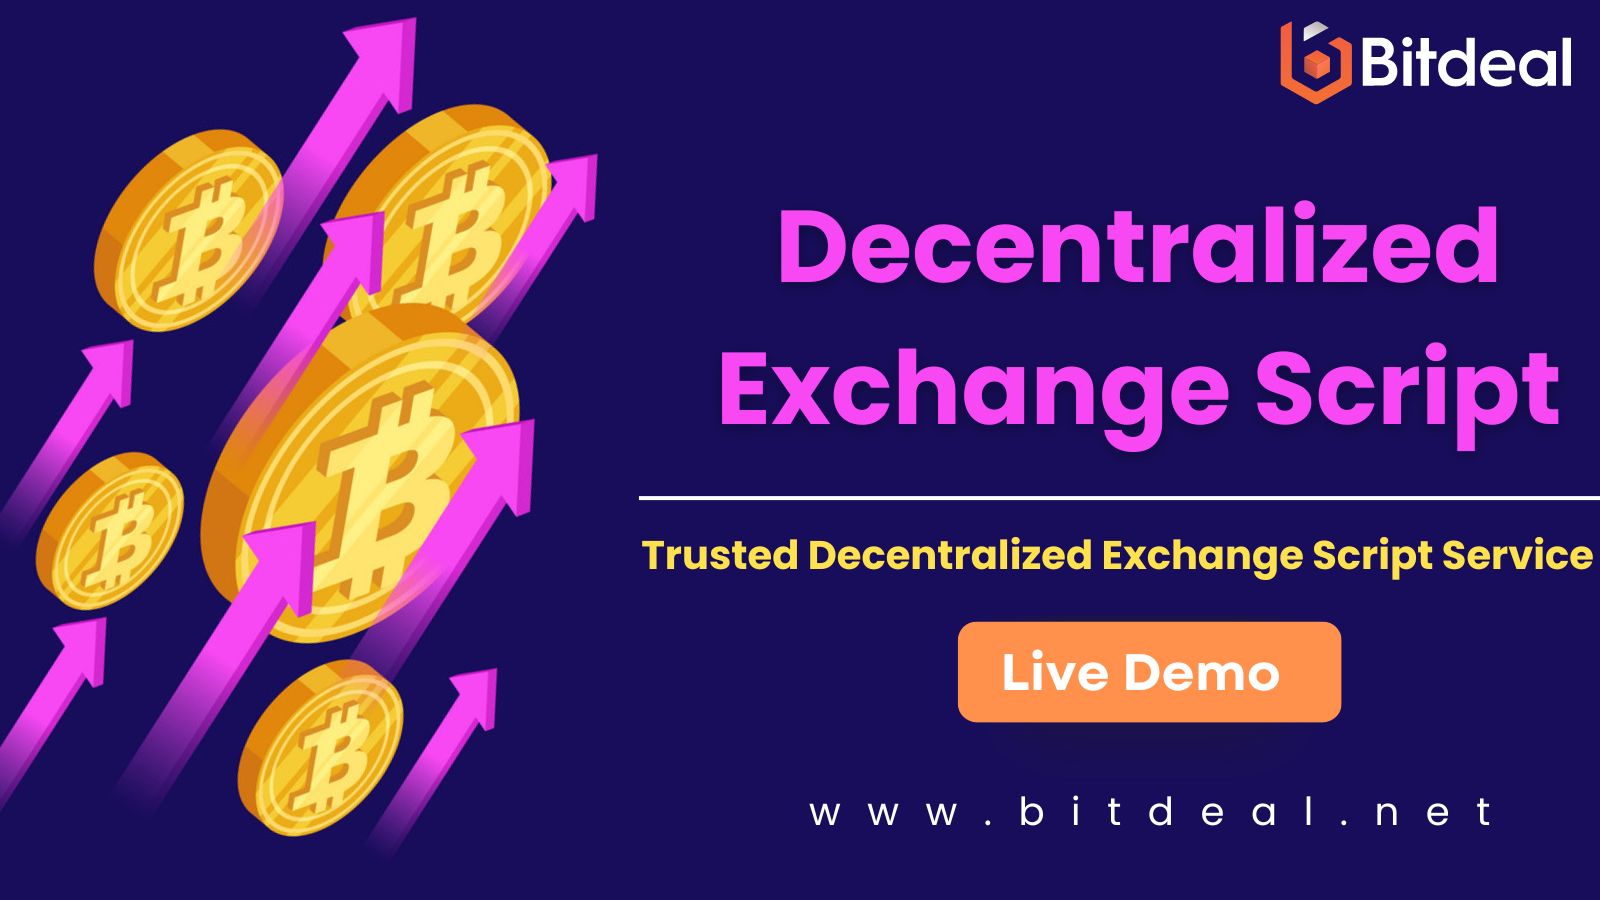 What Is A Decentralized Exchange And How Does It Works?